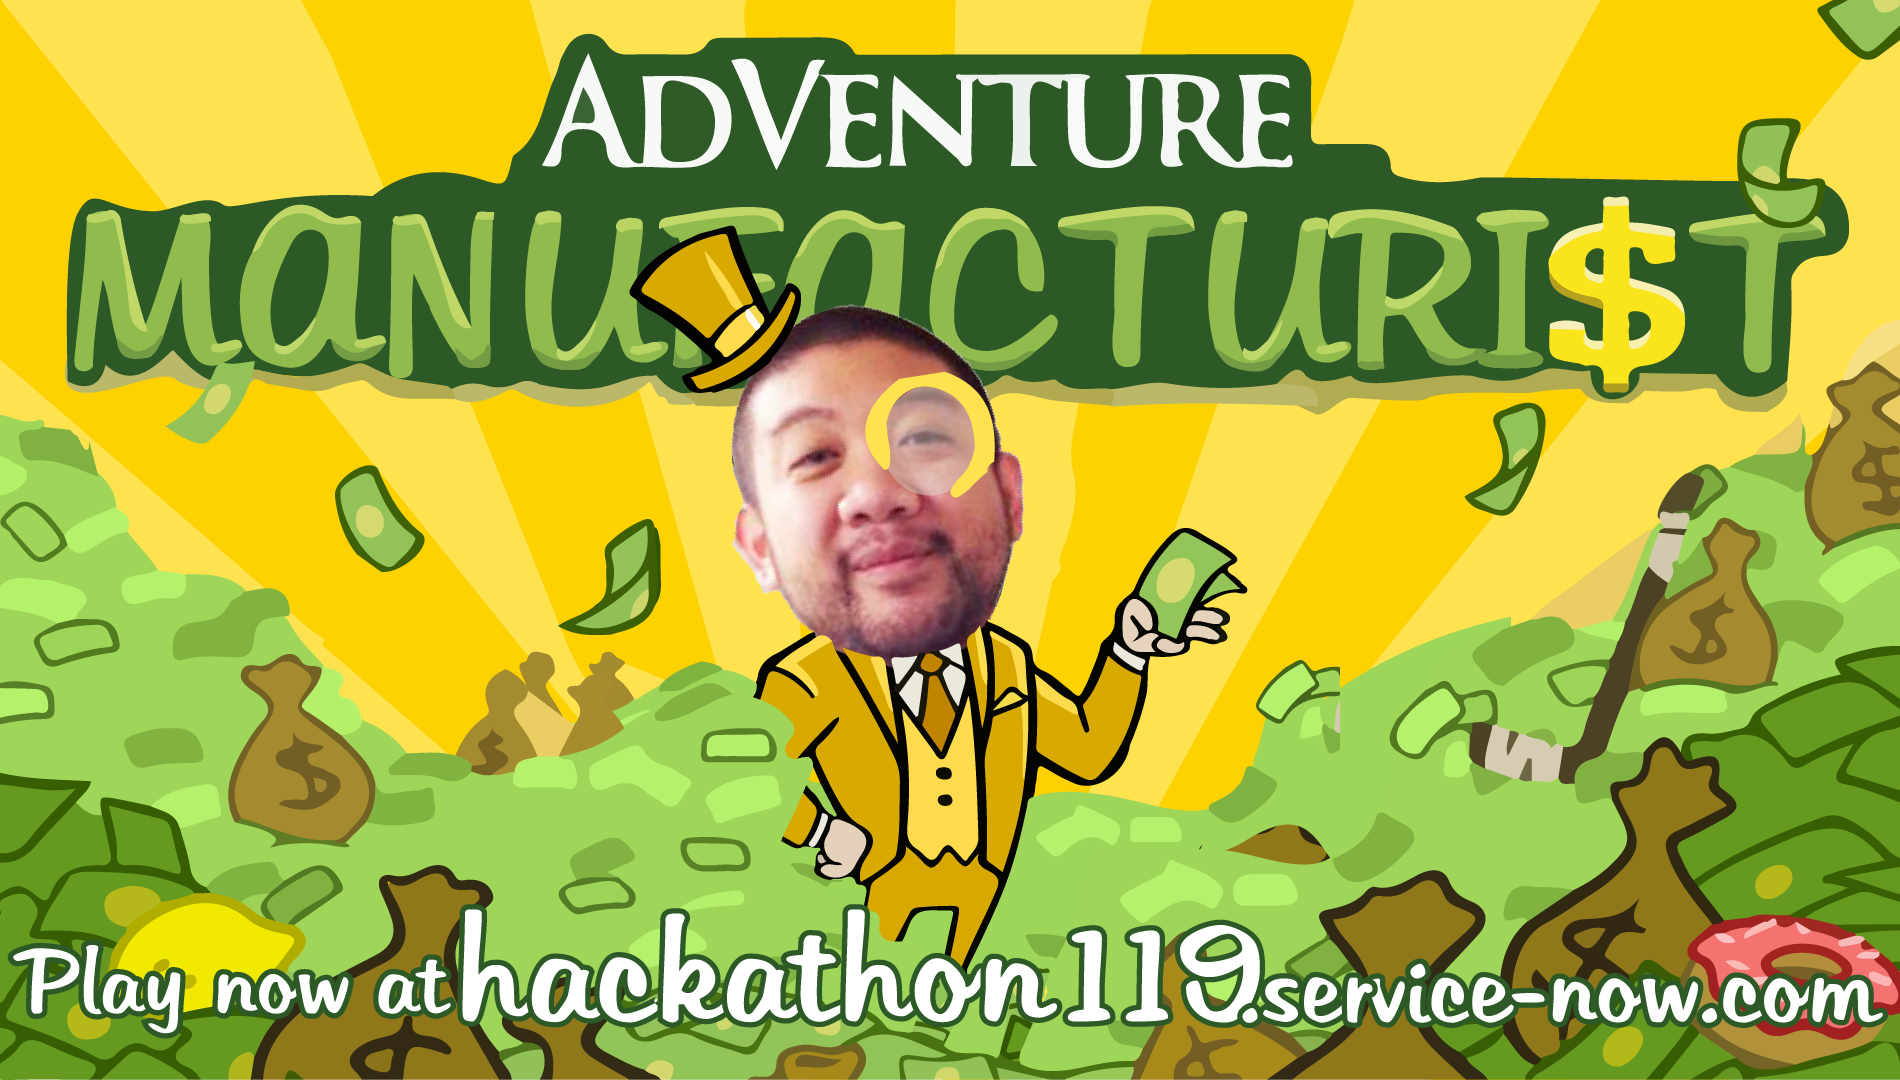 the AdVenture Capitalist logo but fitted for my app instead